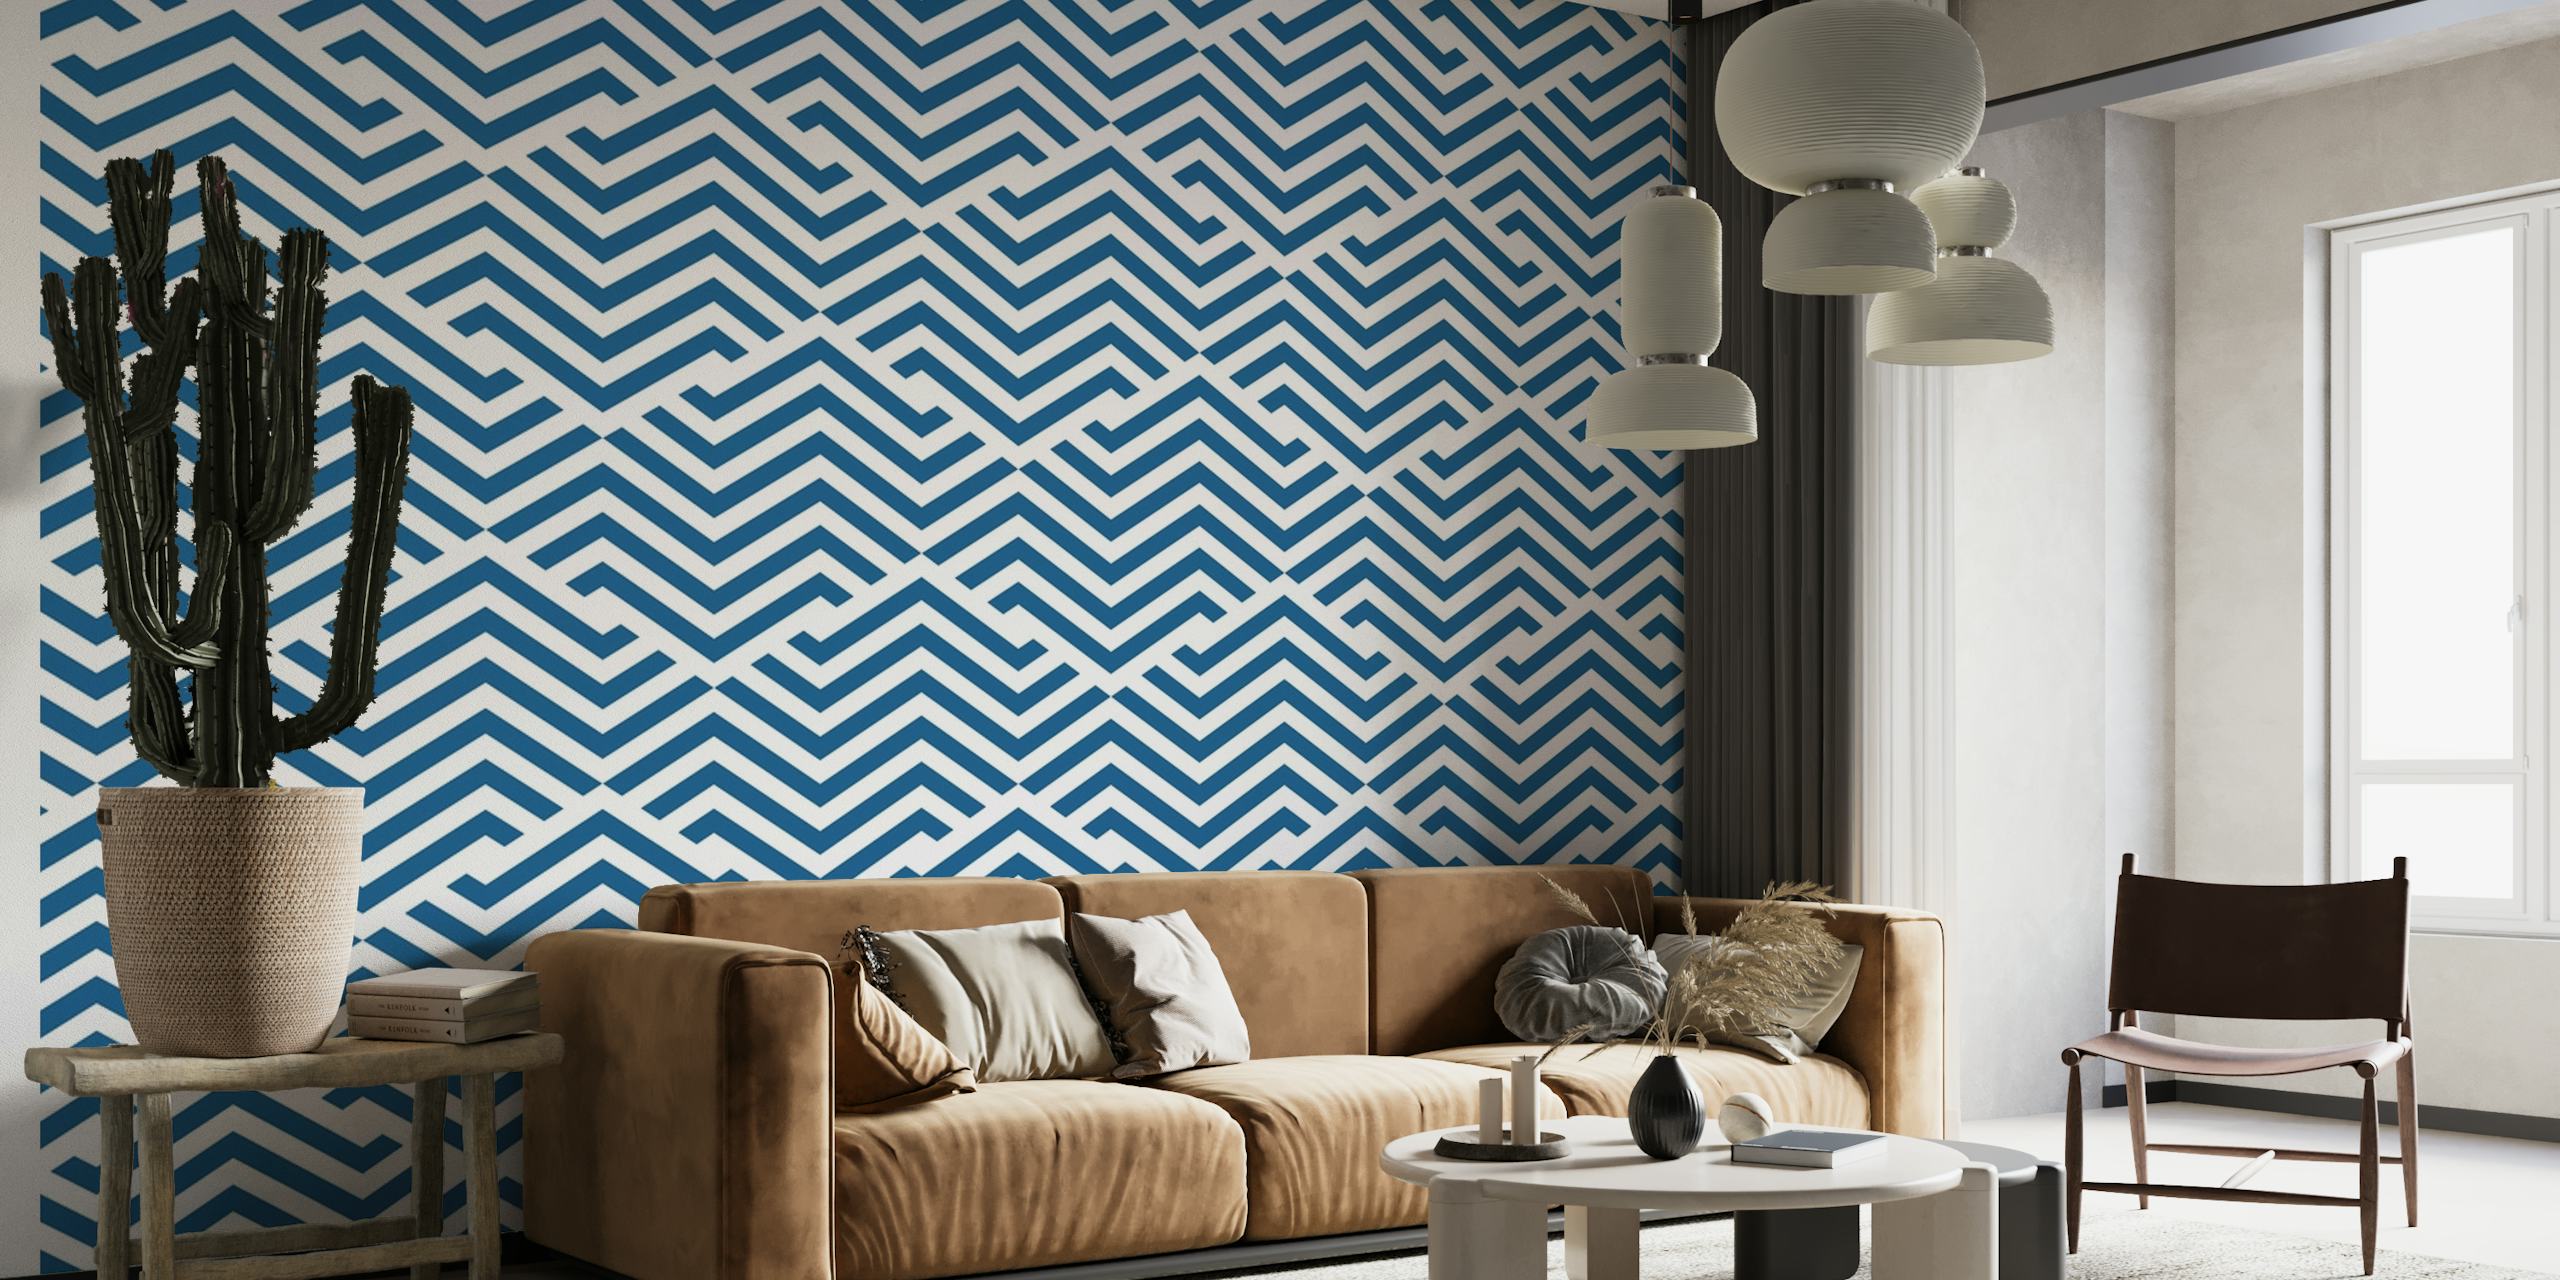 Navy blue and white zigzag pattern wall mural named Kavala.